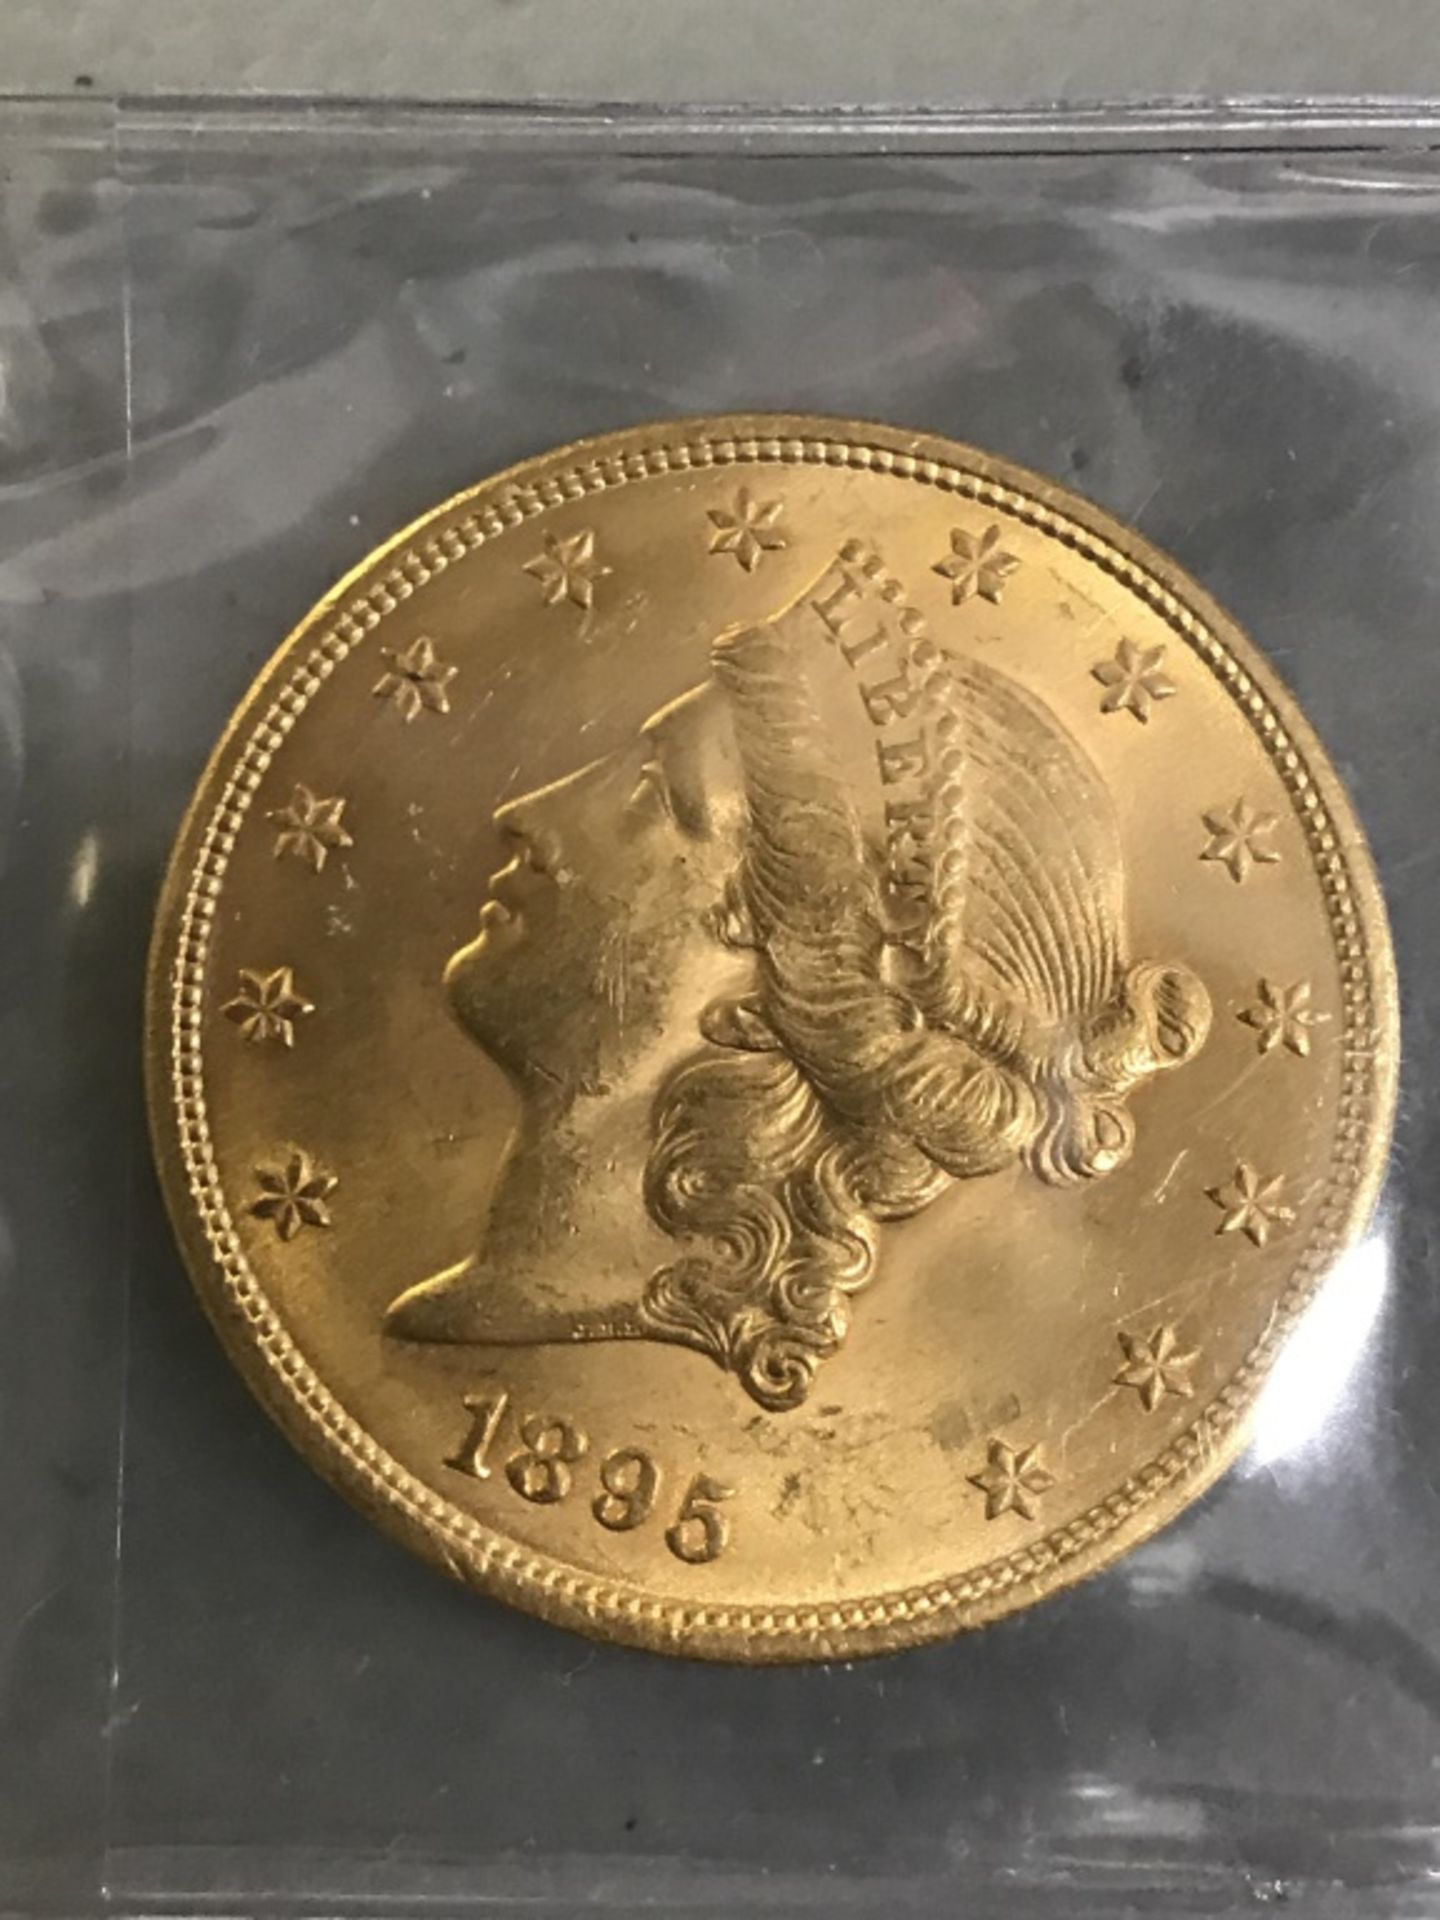 $20 US Gold 1895 Coin